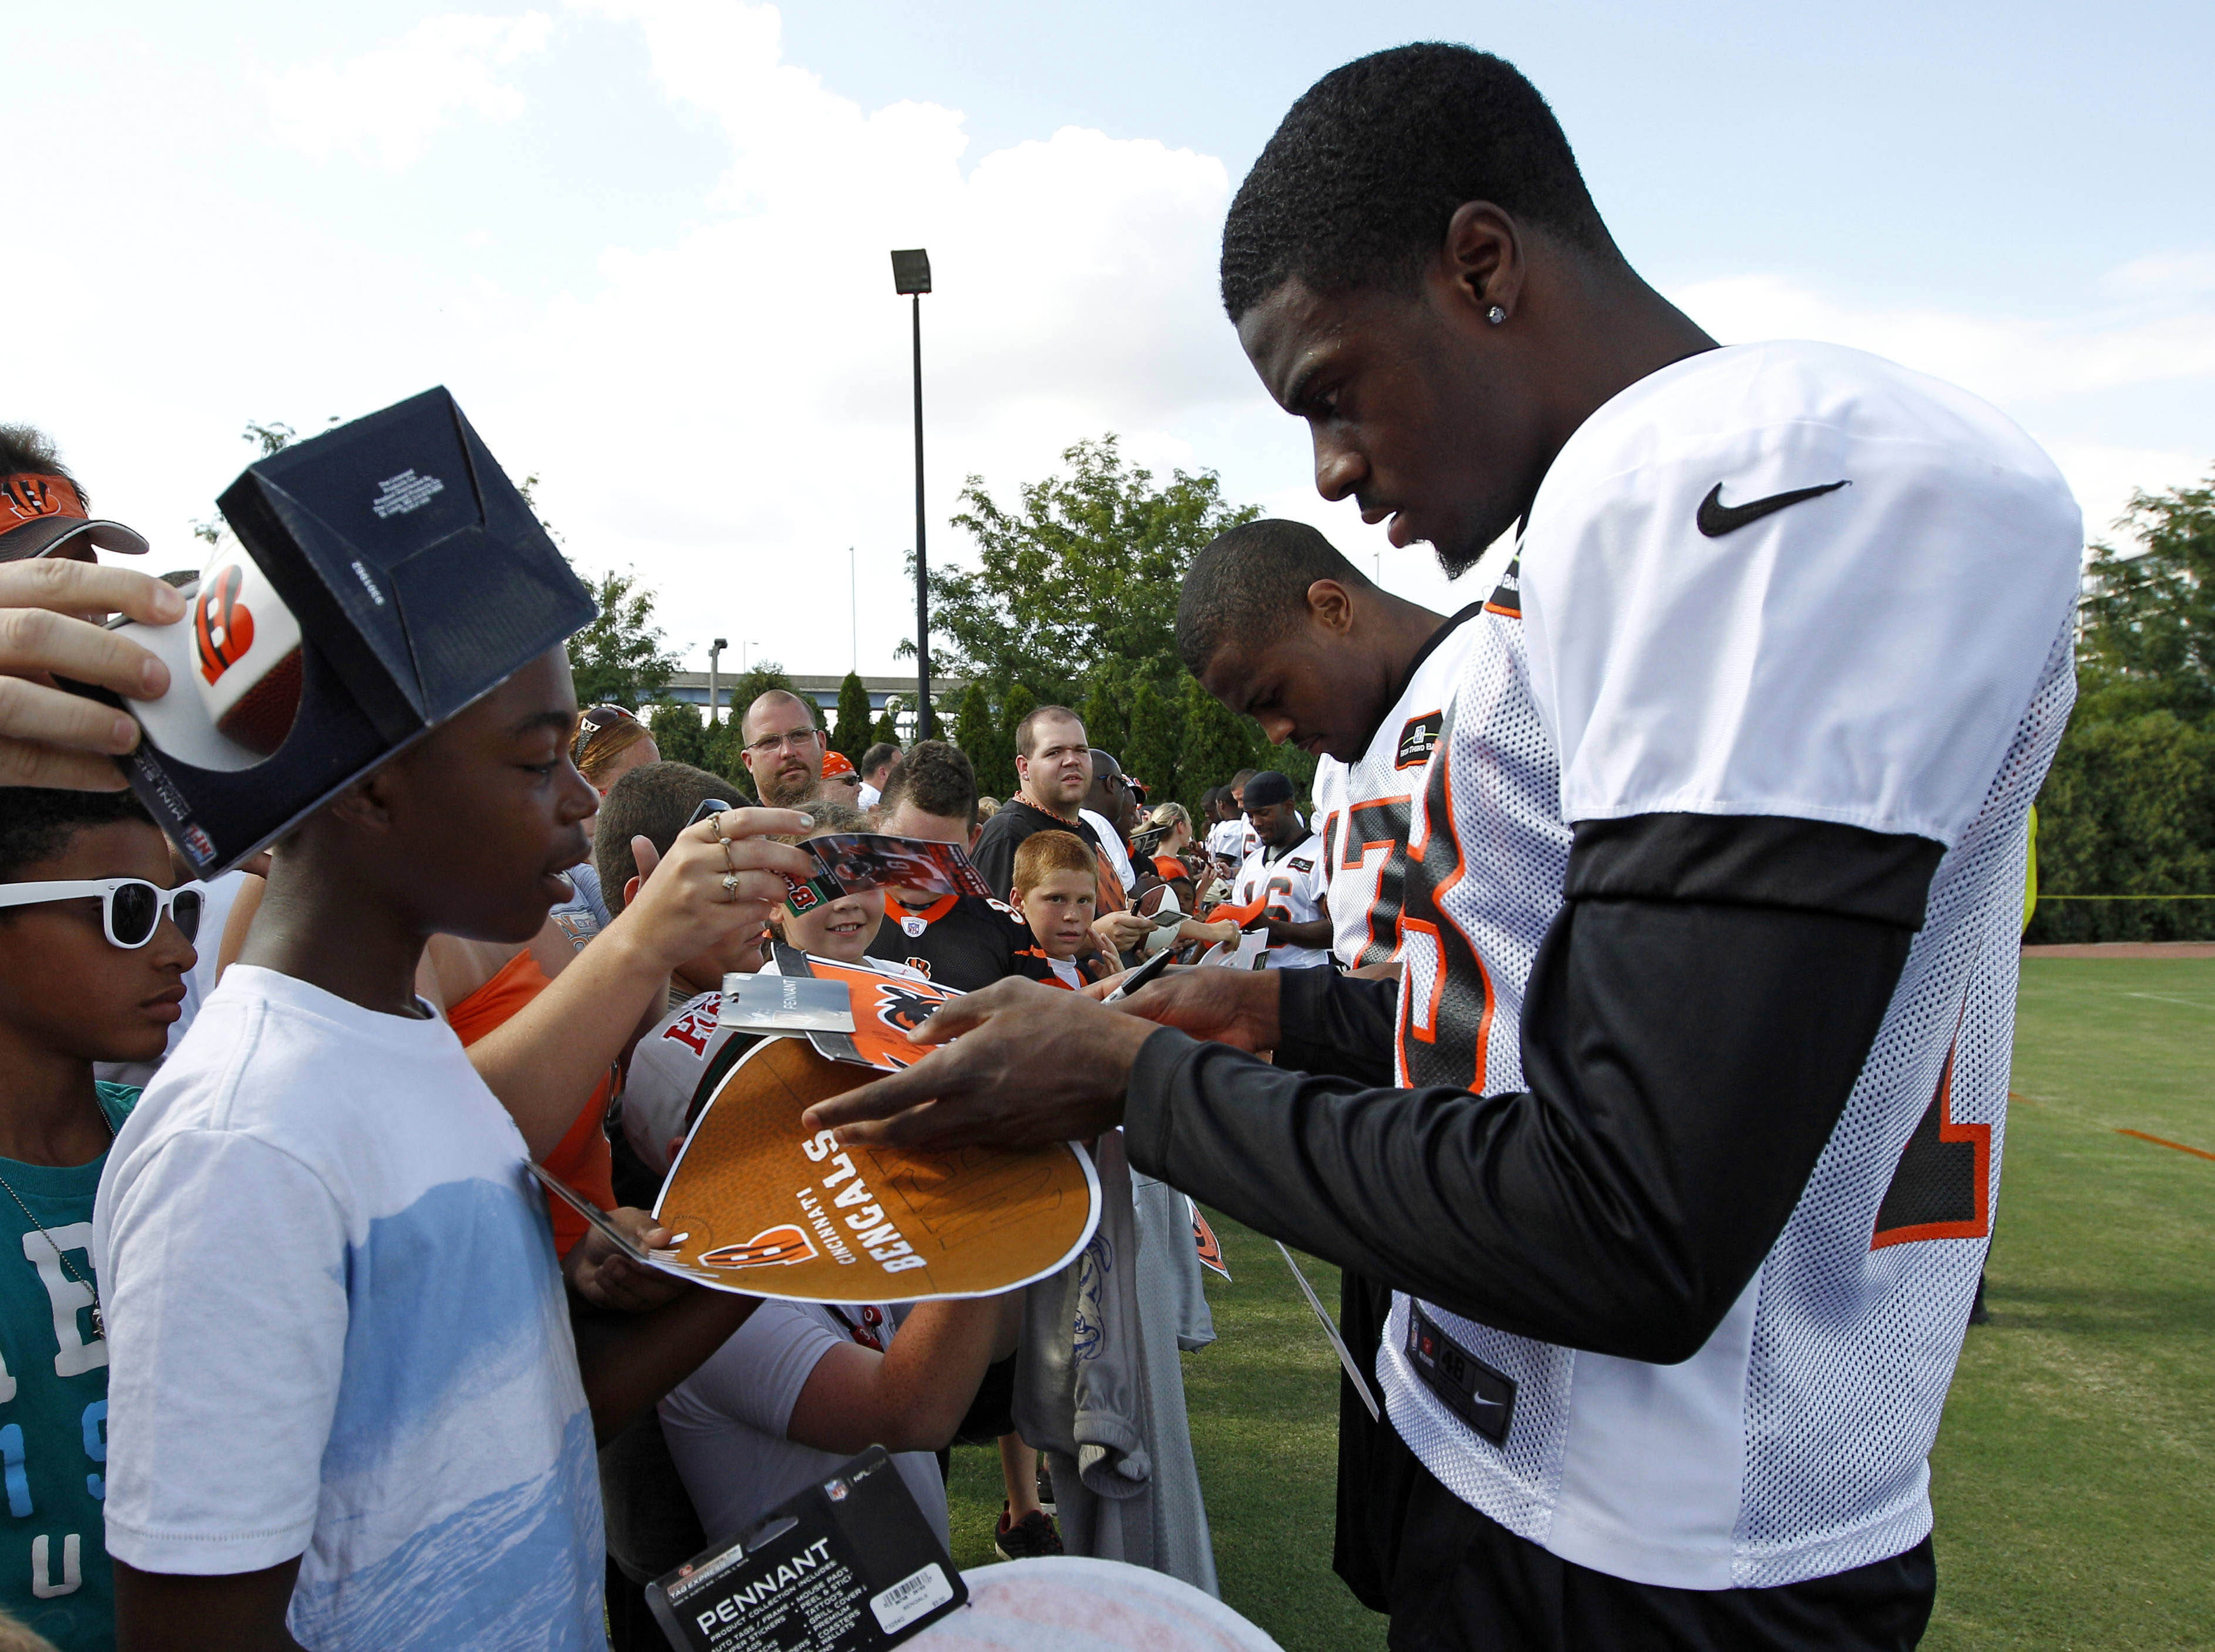 Jul 28, 2012; Cincinnati, OH, USA; Cincinnati Bengals wide receiver A.J. Green (18) signs autographs for fans during training camp at Paul Brown Stadium. Mandatory Credit: Frank Victores-US PRESSWIRE